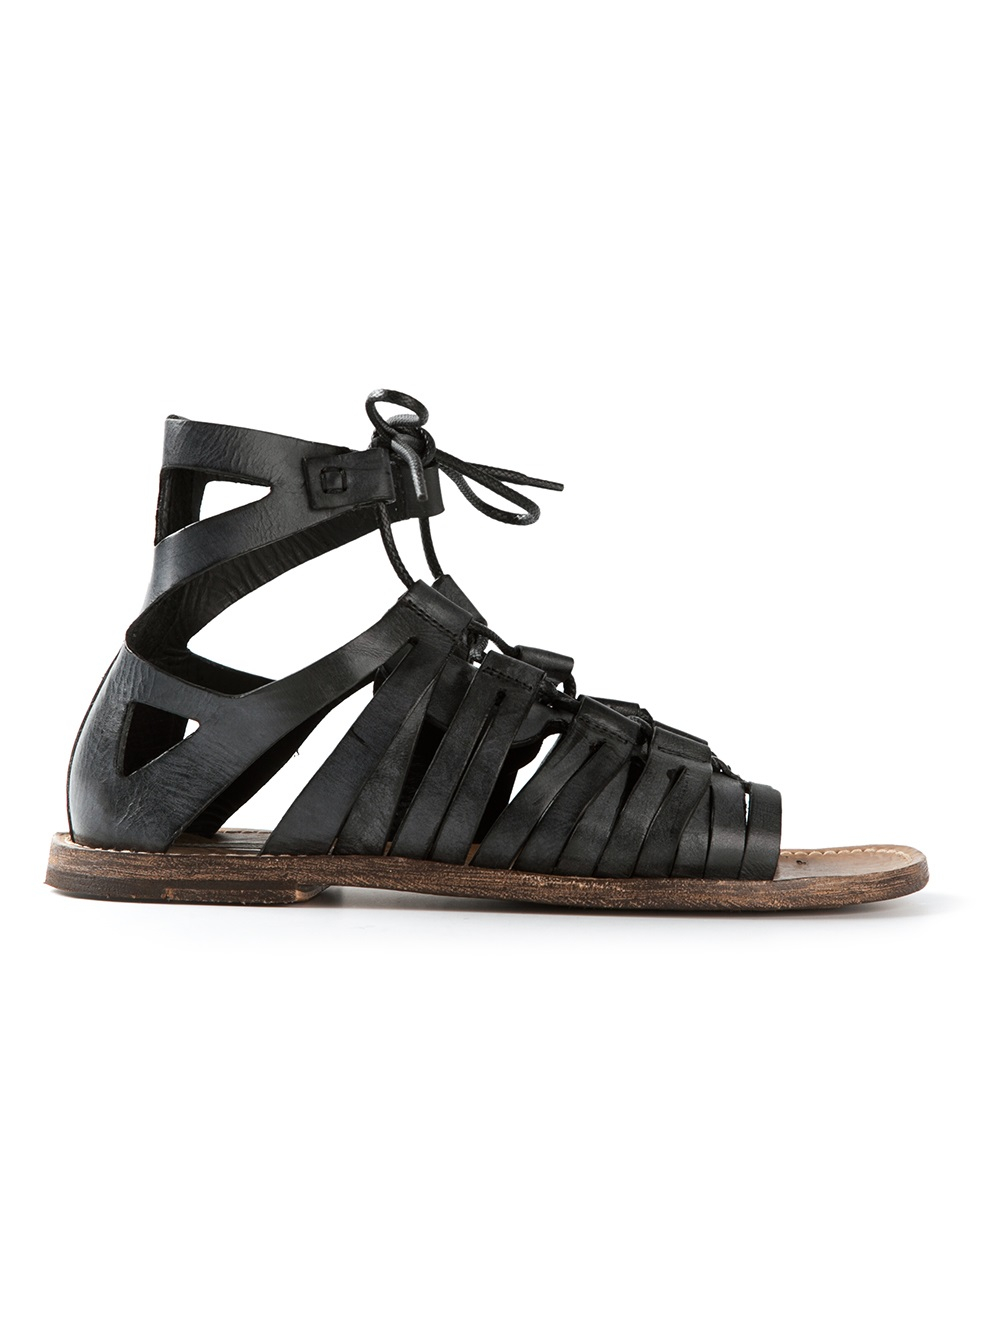 Black leather gladiator sandals from dolce  gabbana featuring a lace ...